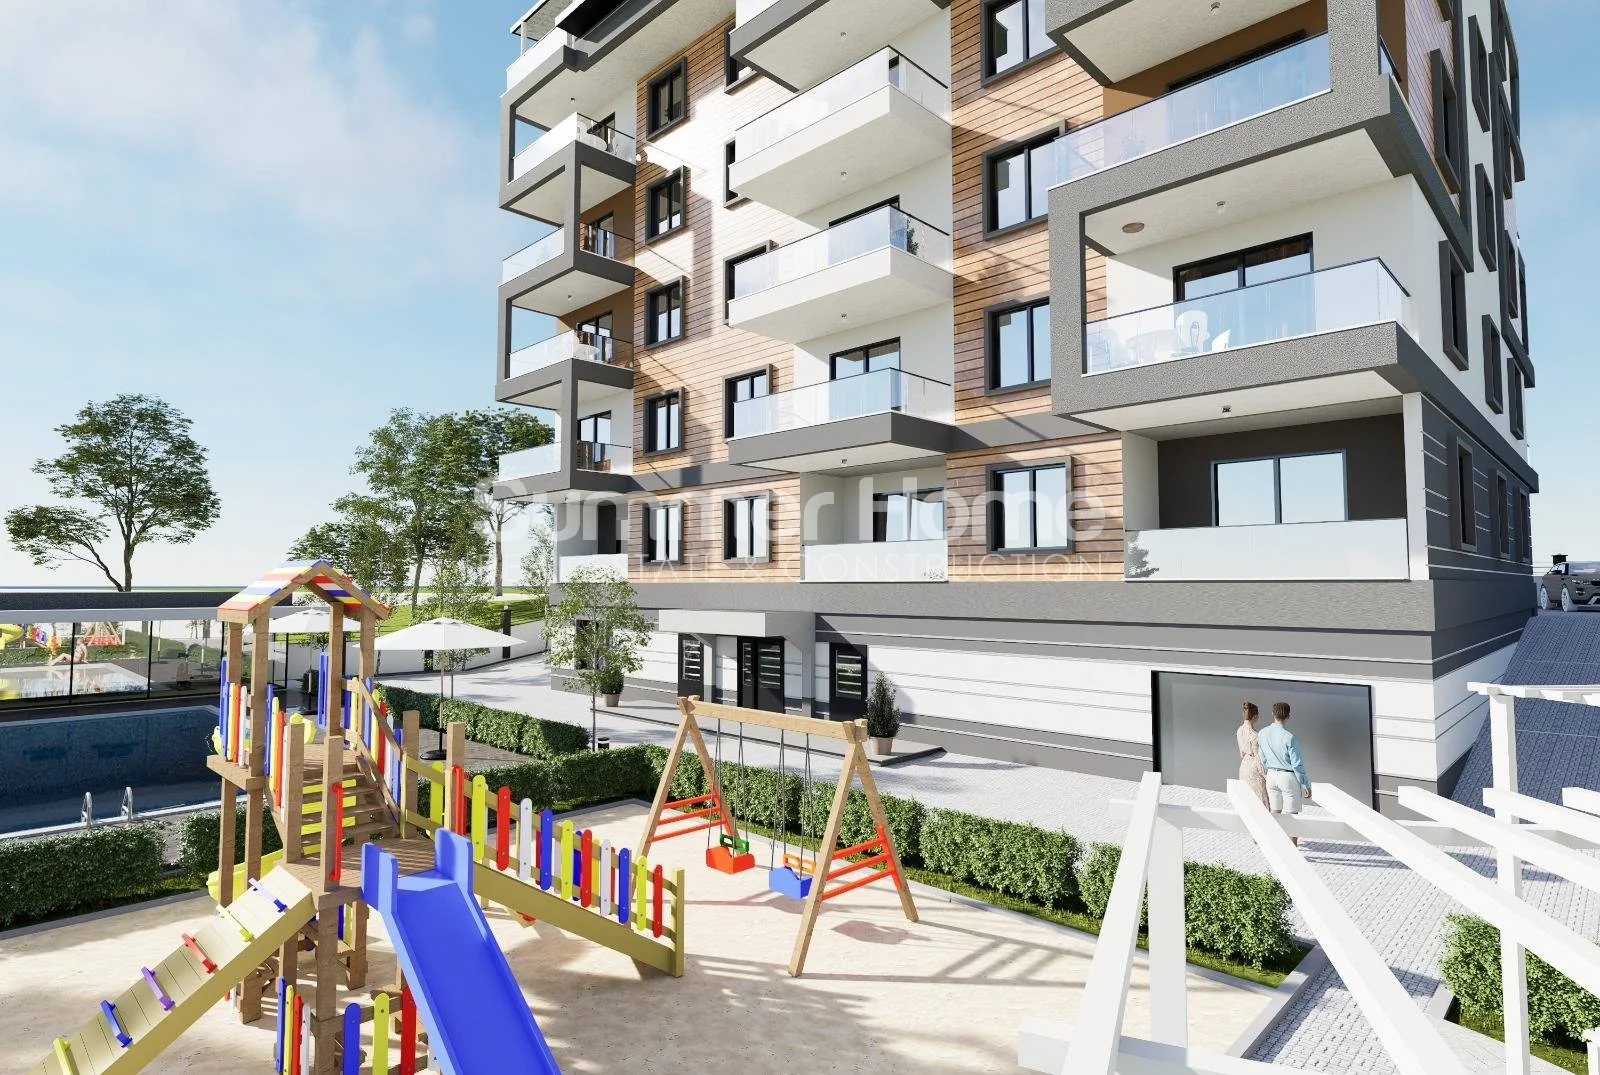 Ultra Modern Apartments in Highly Desirable Gazipasa Area general - 1